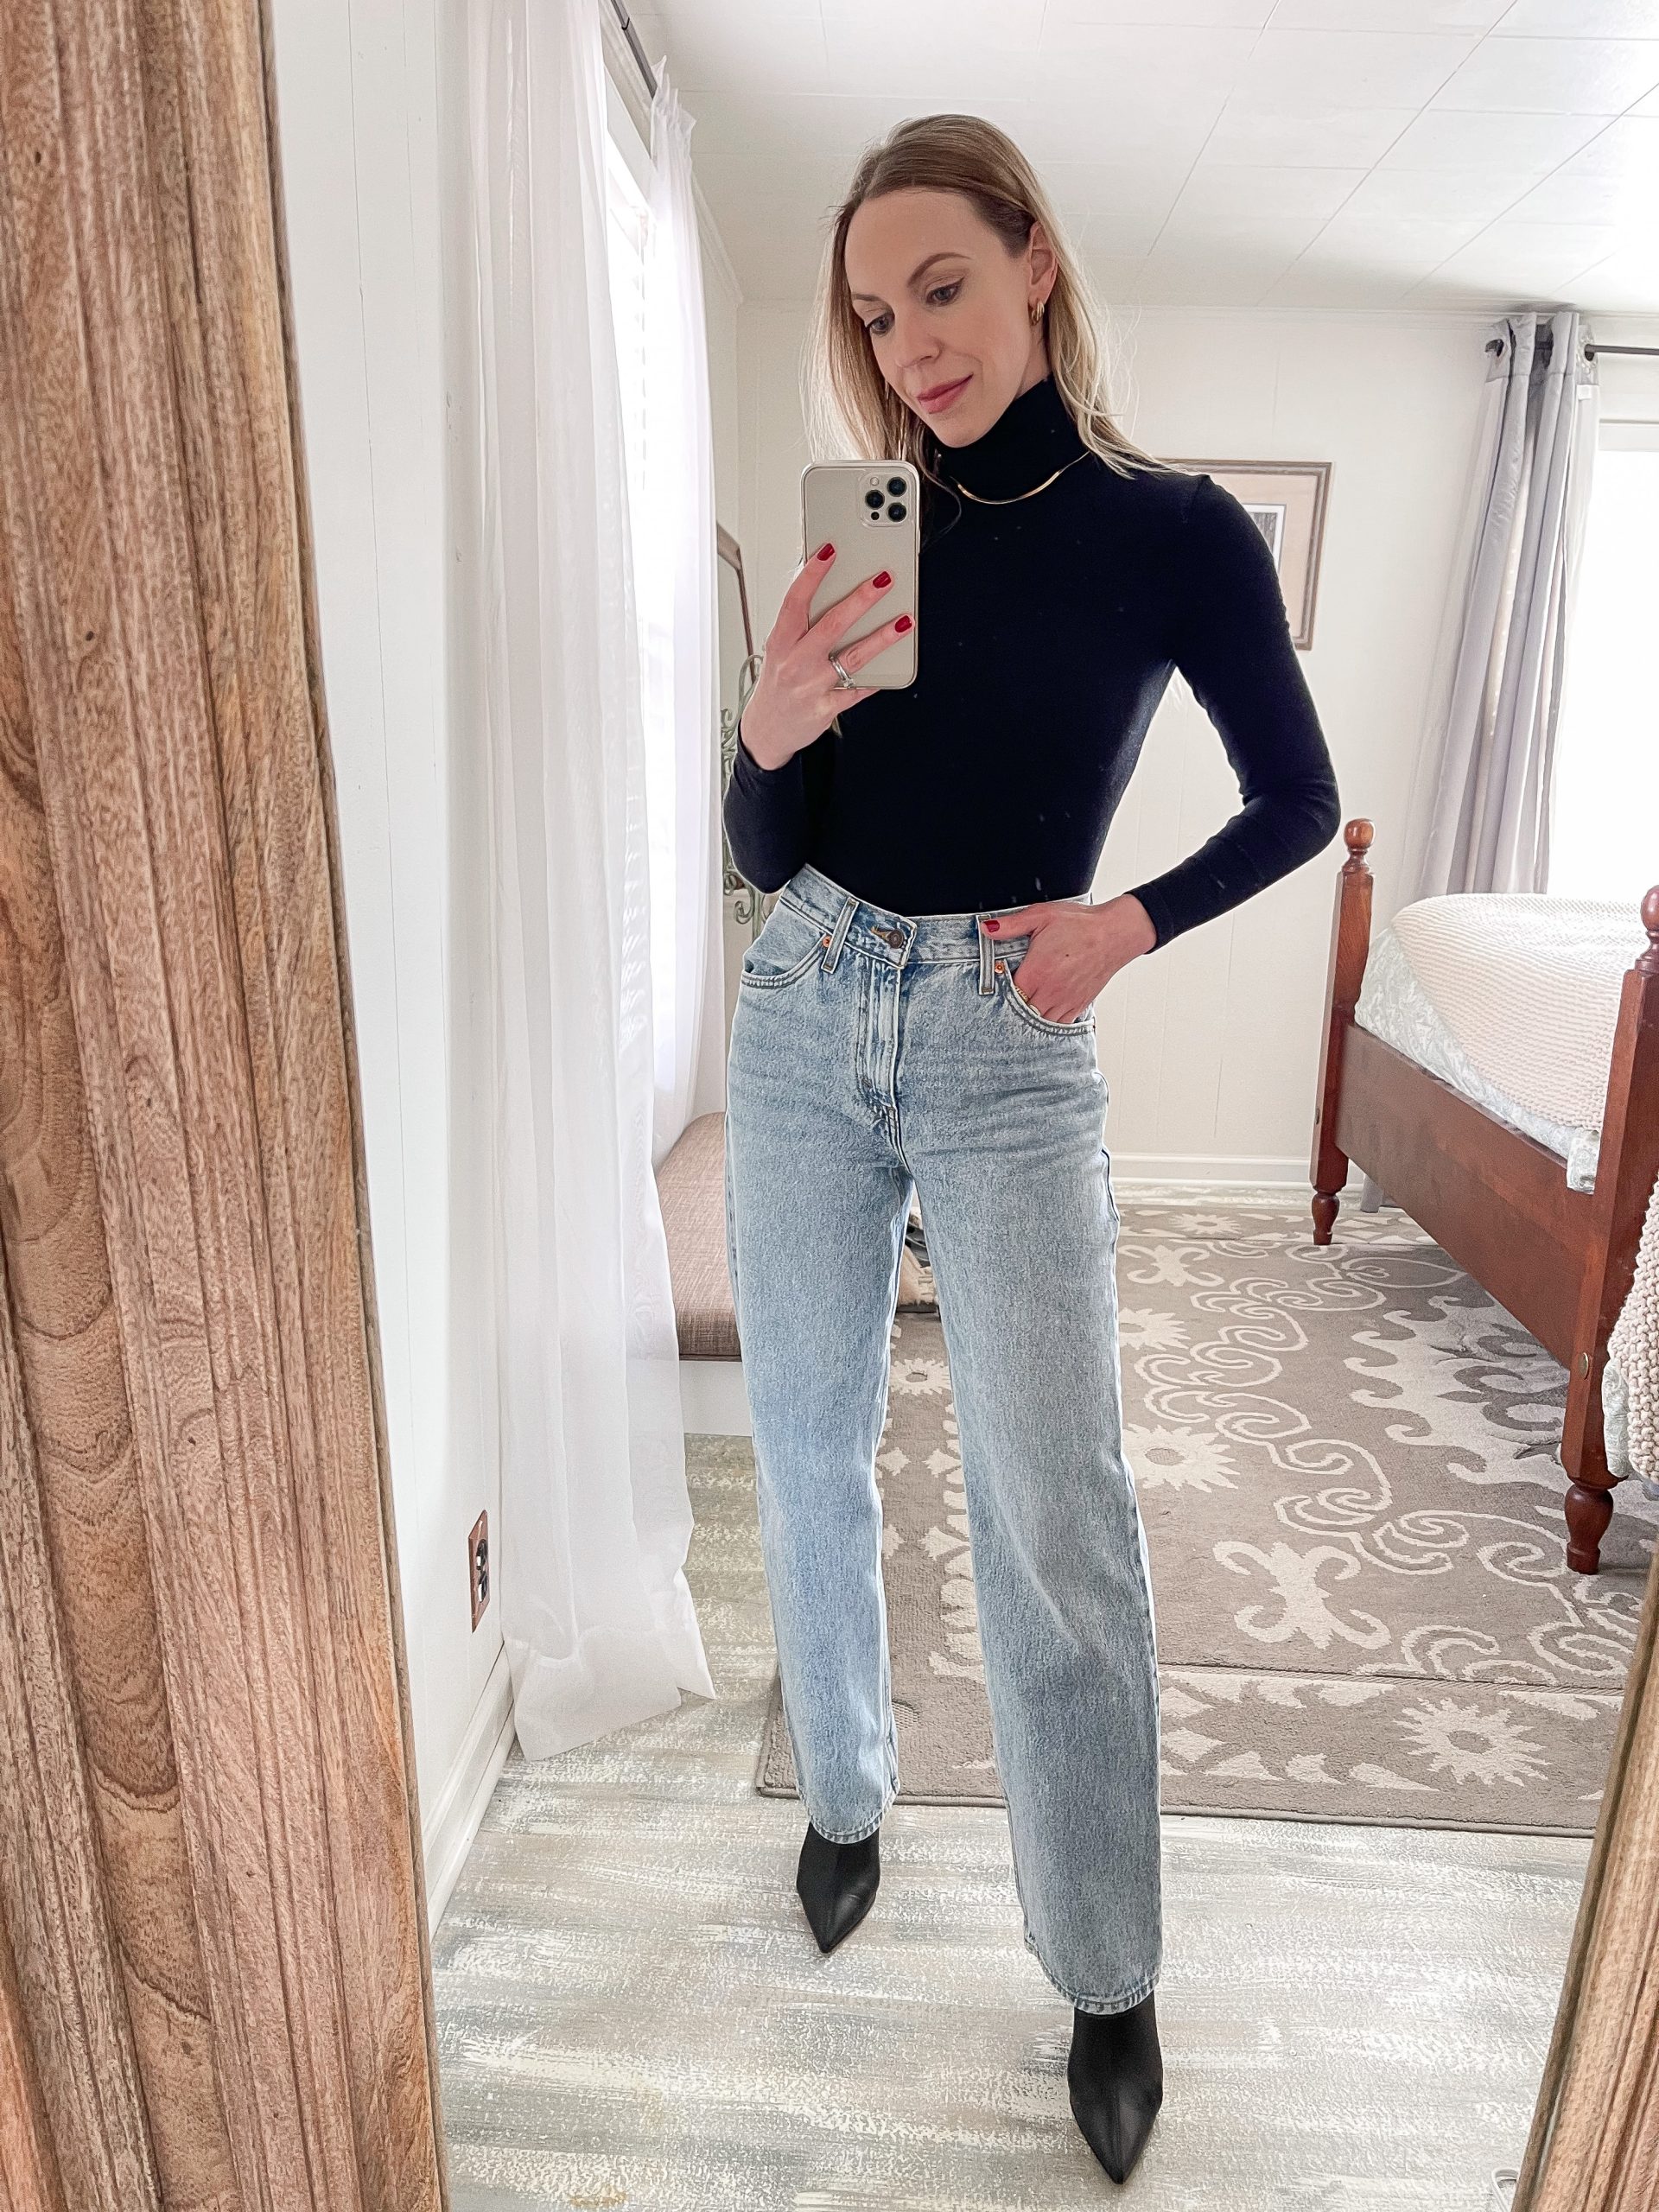 3 New Pairs of Jeans I'm Loving & Key Denim Trends for Spring 2022 -  Meagan's Moda